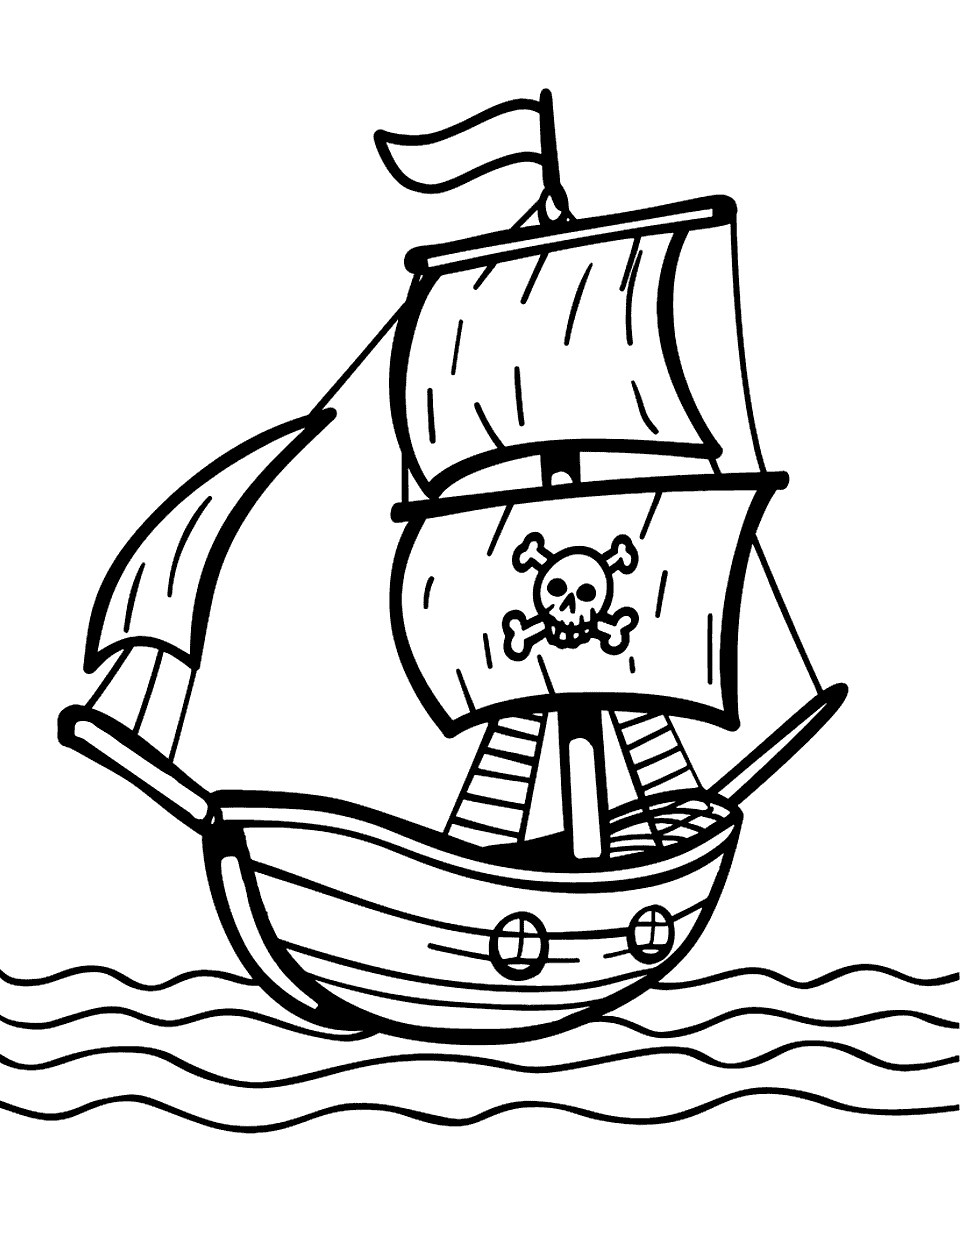 Pirate Ship Adventure Toddler Coloring Page - A pirate ship on calm seas, with a single pirate flag waving.